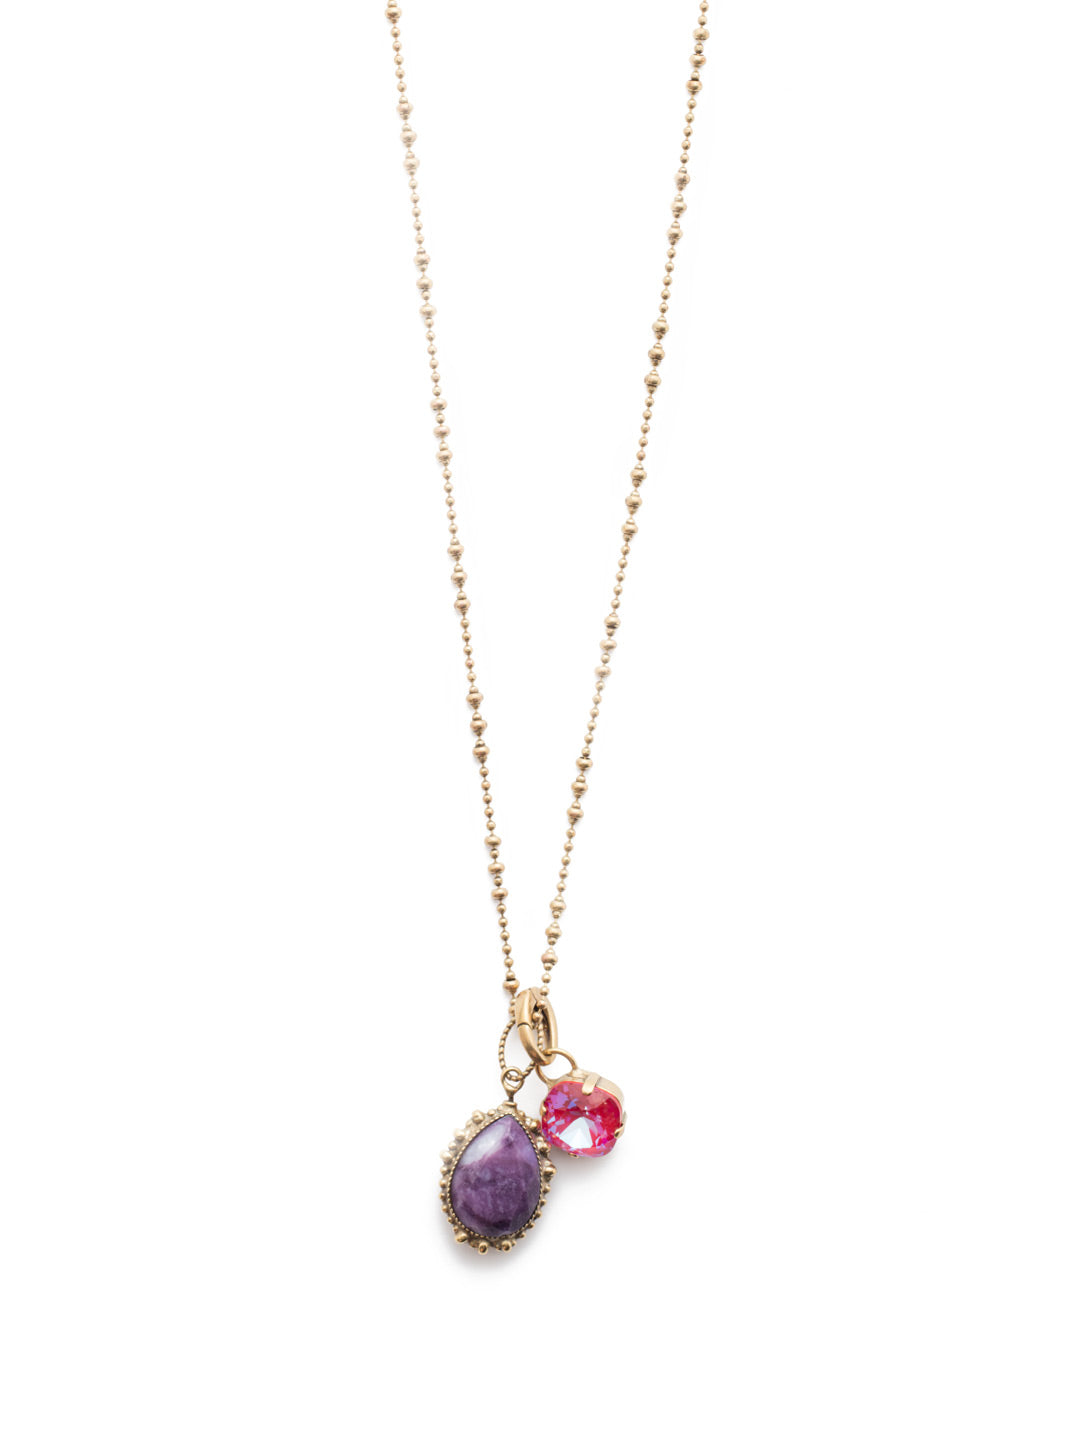 Arizona Pendant Necklace - NEU13AGDCS - <p>Love the charmed look? Get our Arizona Pendant Necklace. A delicate metal chain holds onto a stunning cushion-cut crystal and pear-shaped mineral stone. From Sorrelli's Duchess collection in our Antique Gold-tone finish.</p>